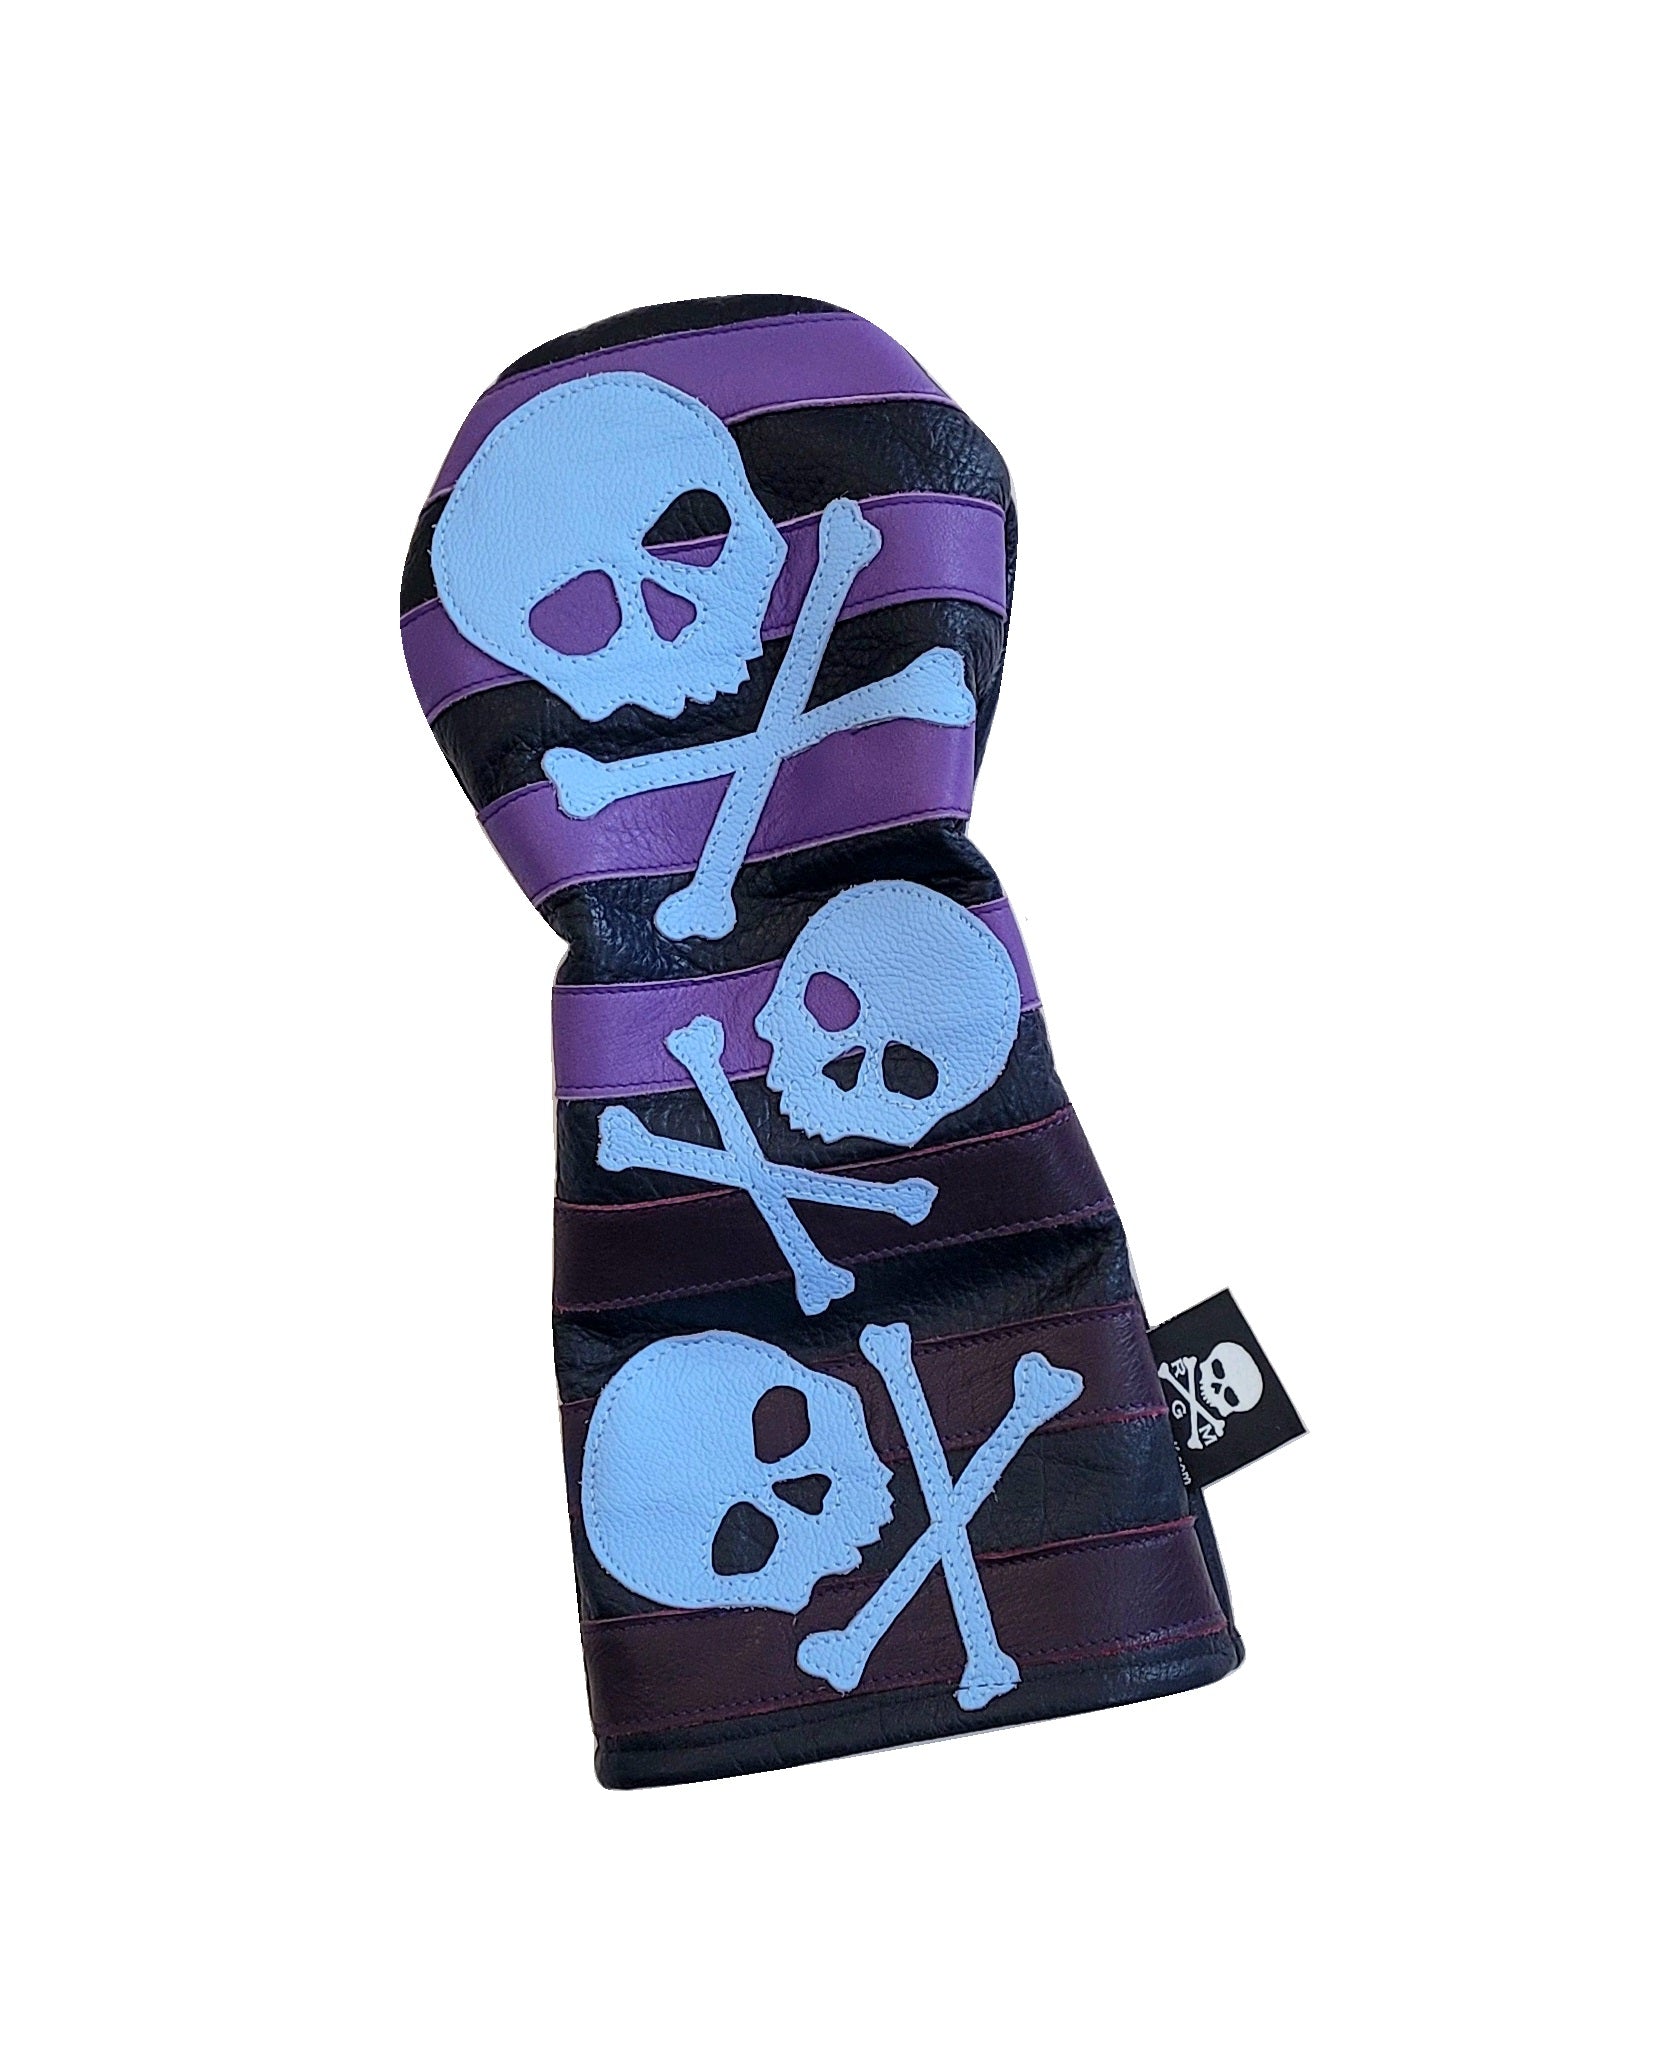 One-Of-A-Kind! Signature Dancing Skull & Bones / Rugby Stripes Driver Cover - Robert Mark Golf